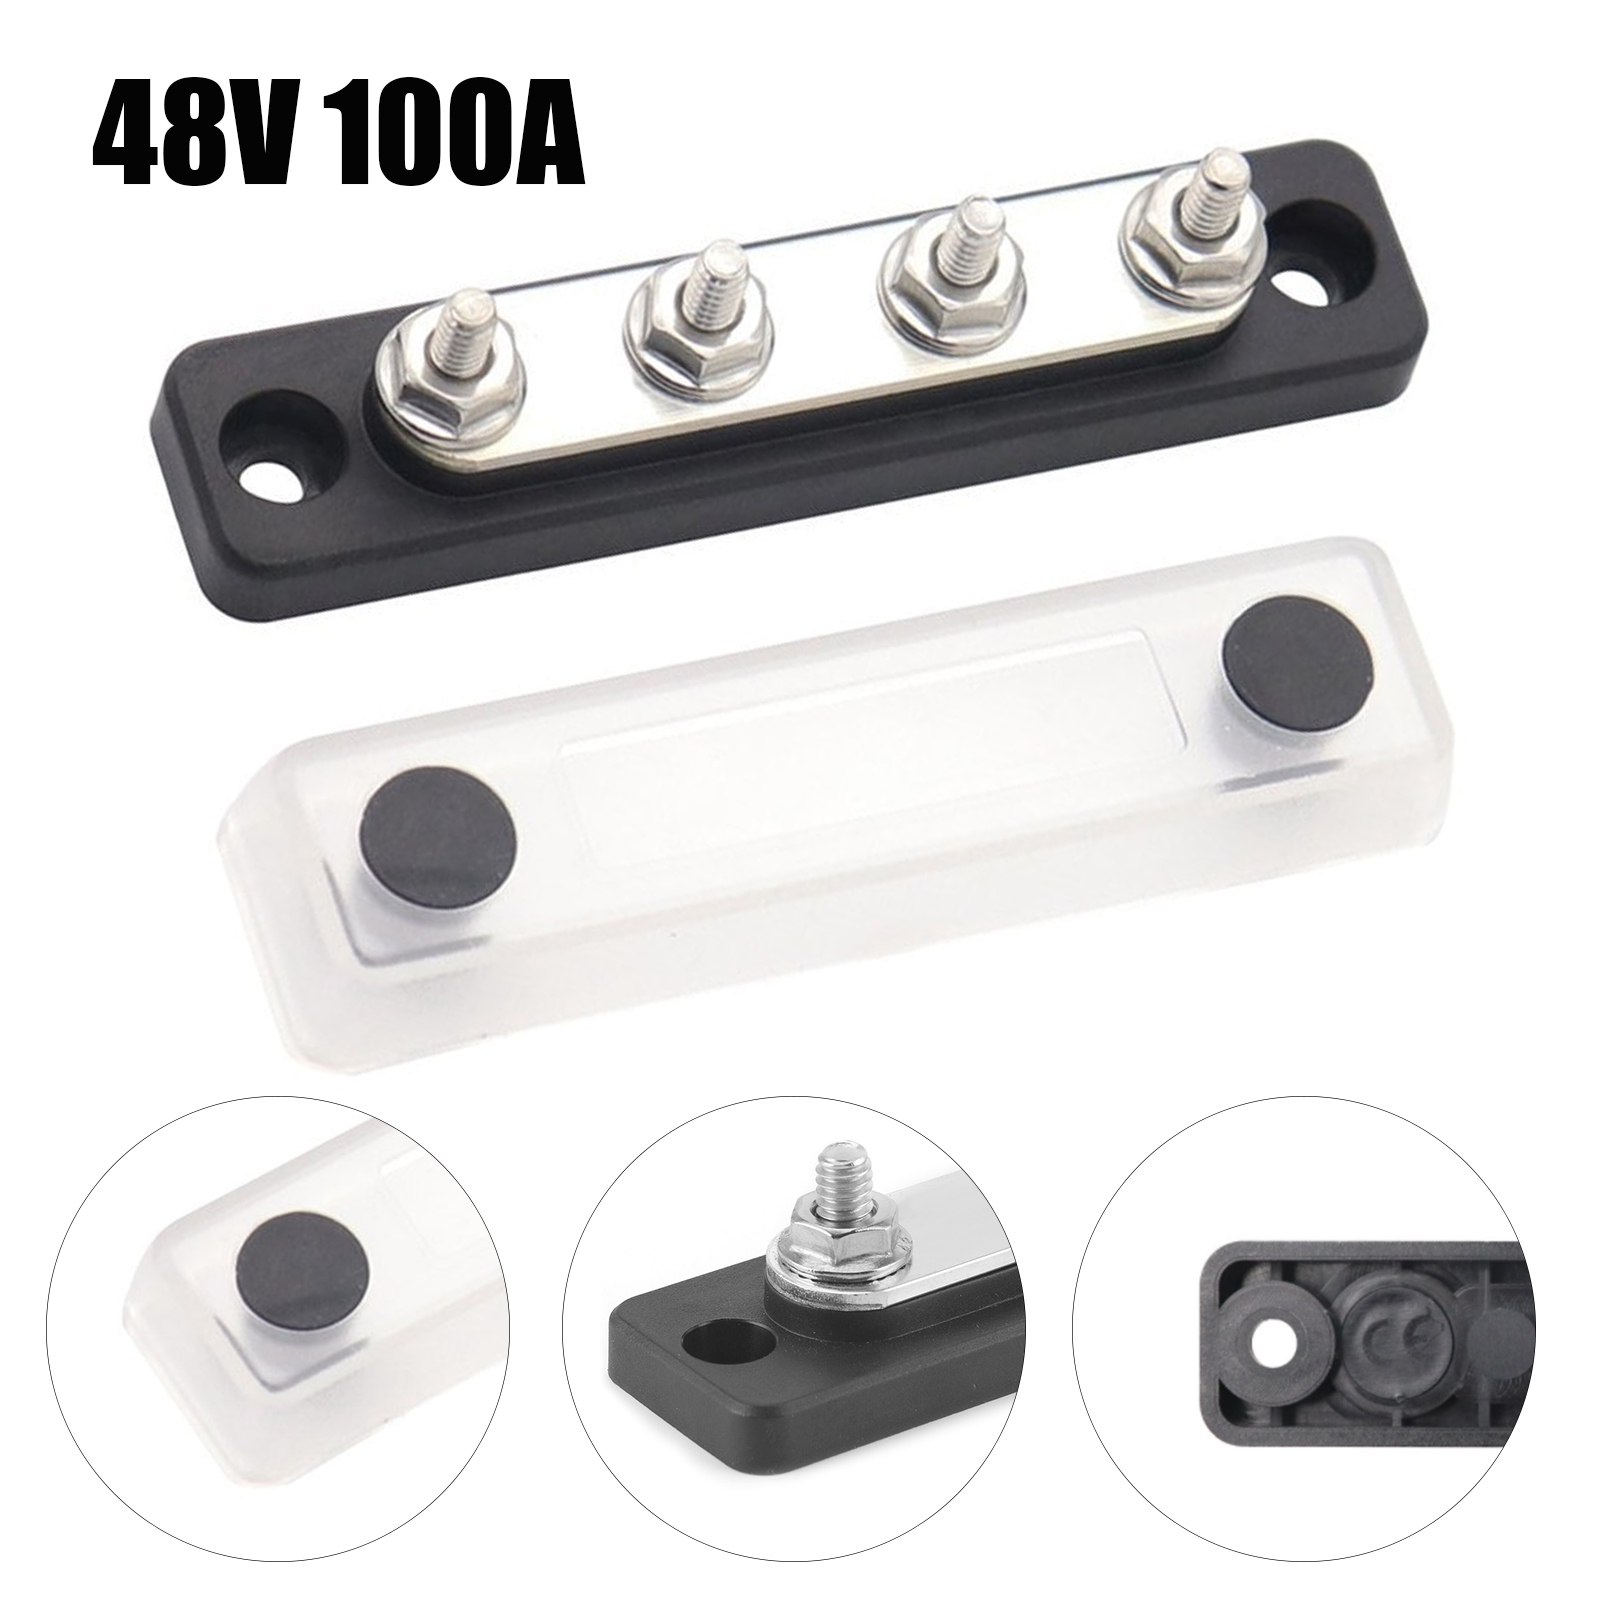 12V/24V 4 WAY POWER DISTRIBUTION BUS BAR 4x5mm STUDS 100A RATED AUTO MARINE BOAT